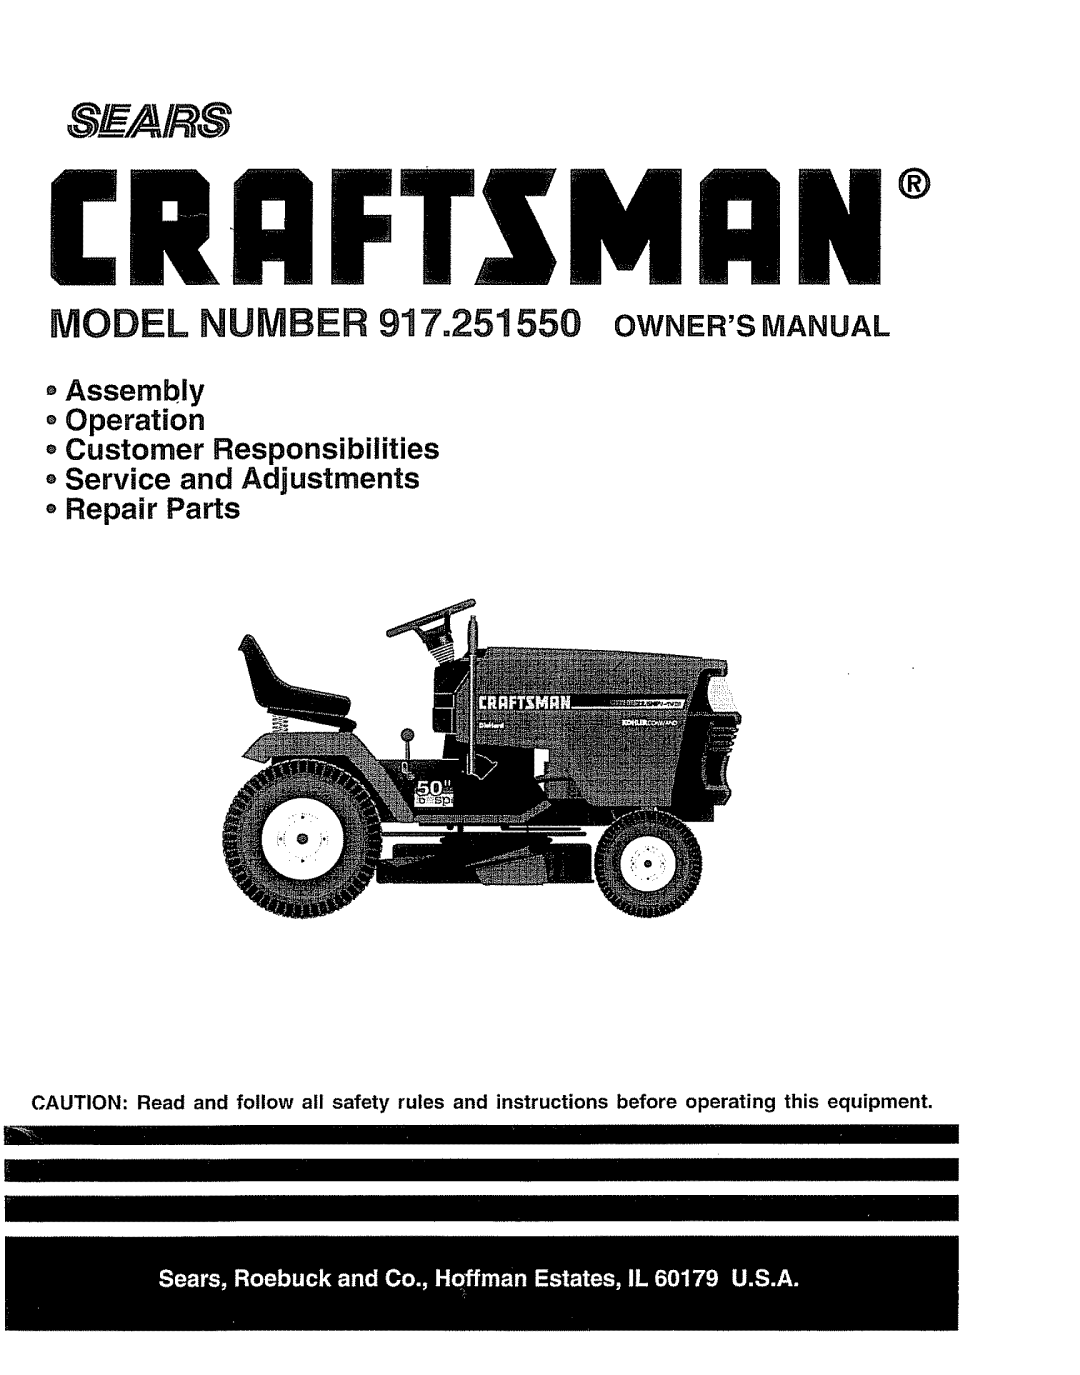 Craftsman 917O251550 owner manual MODEL NUMBER 917o251550 OWNERS MANUAL, oAssembly o Operation Customer Responsibilities 